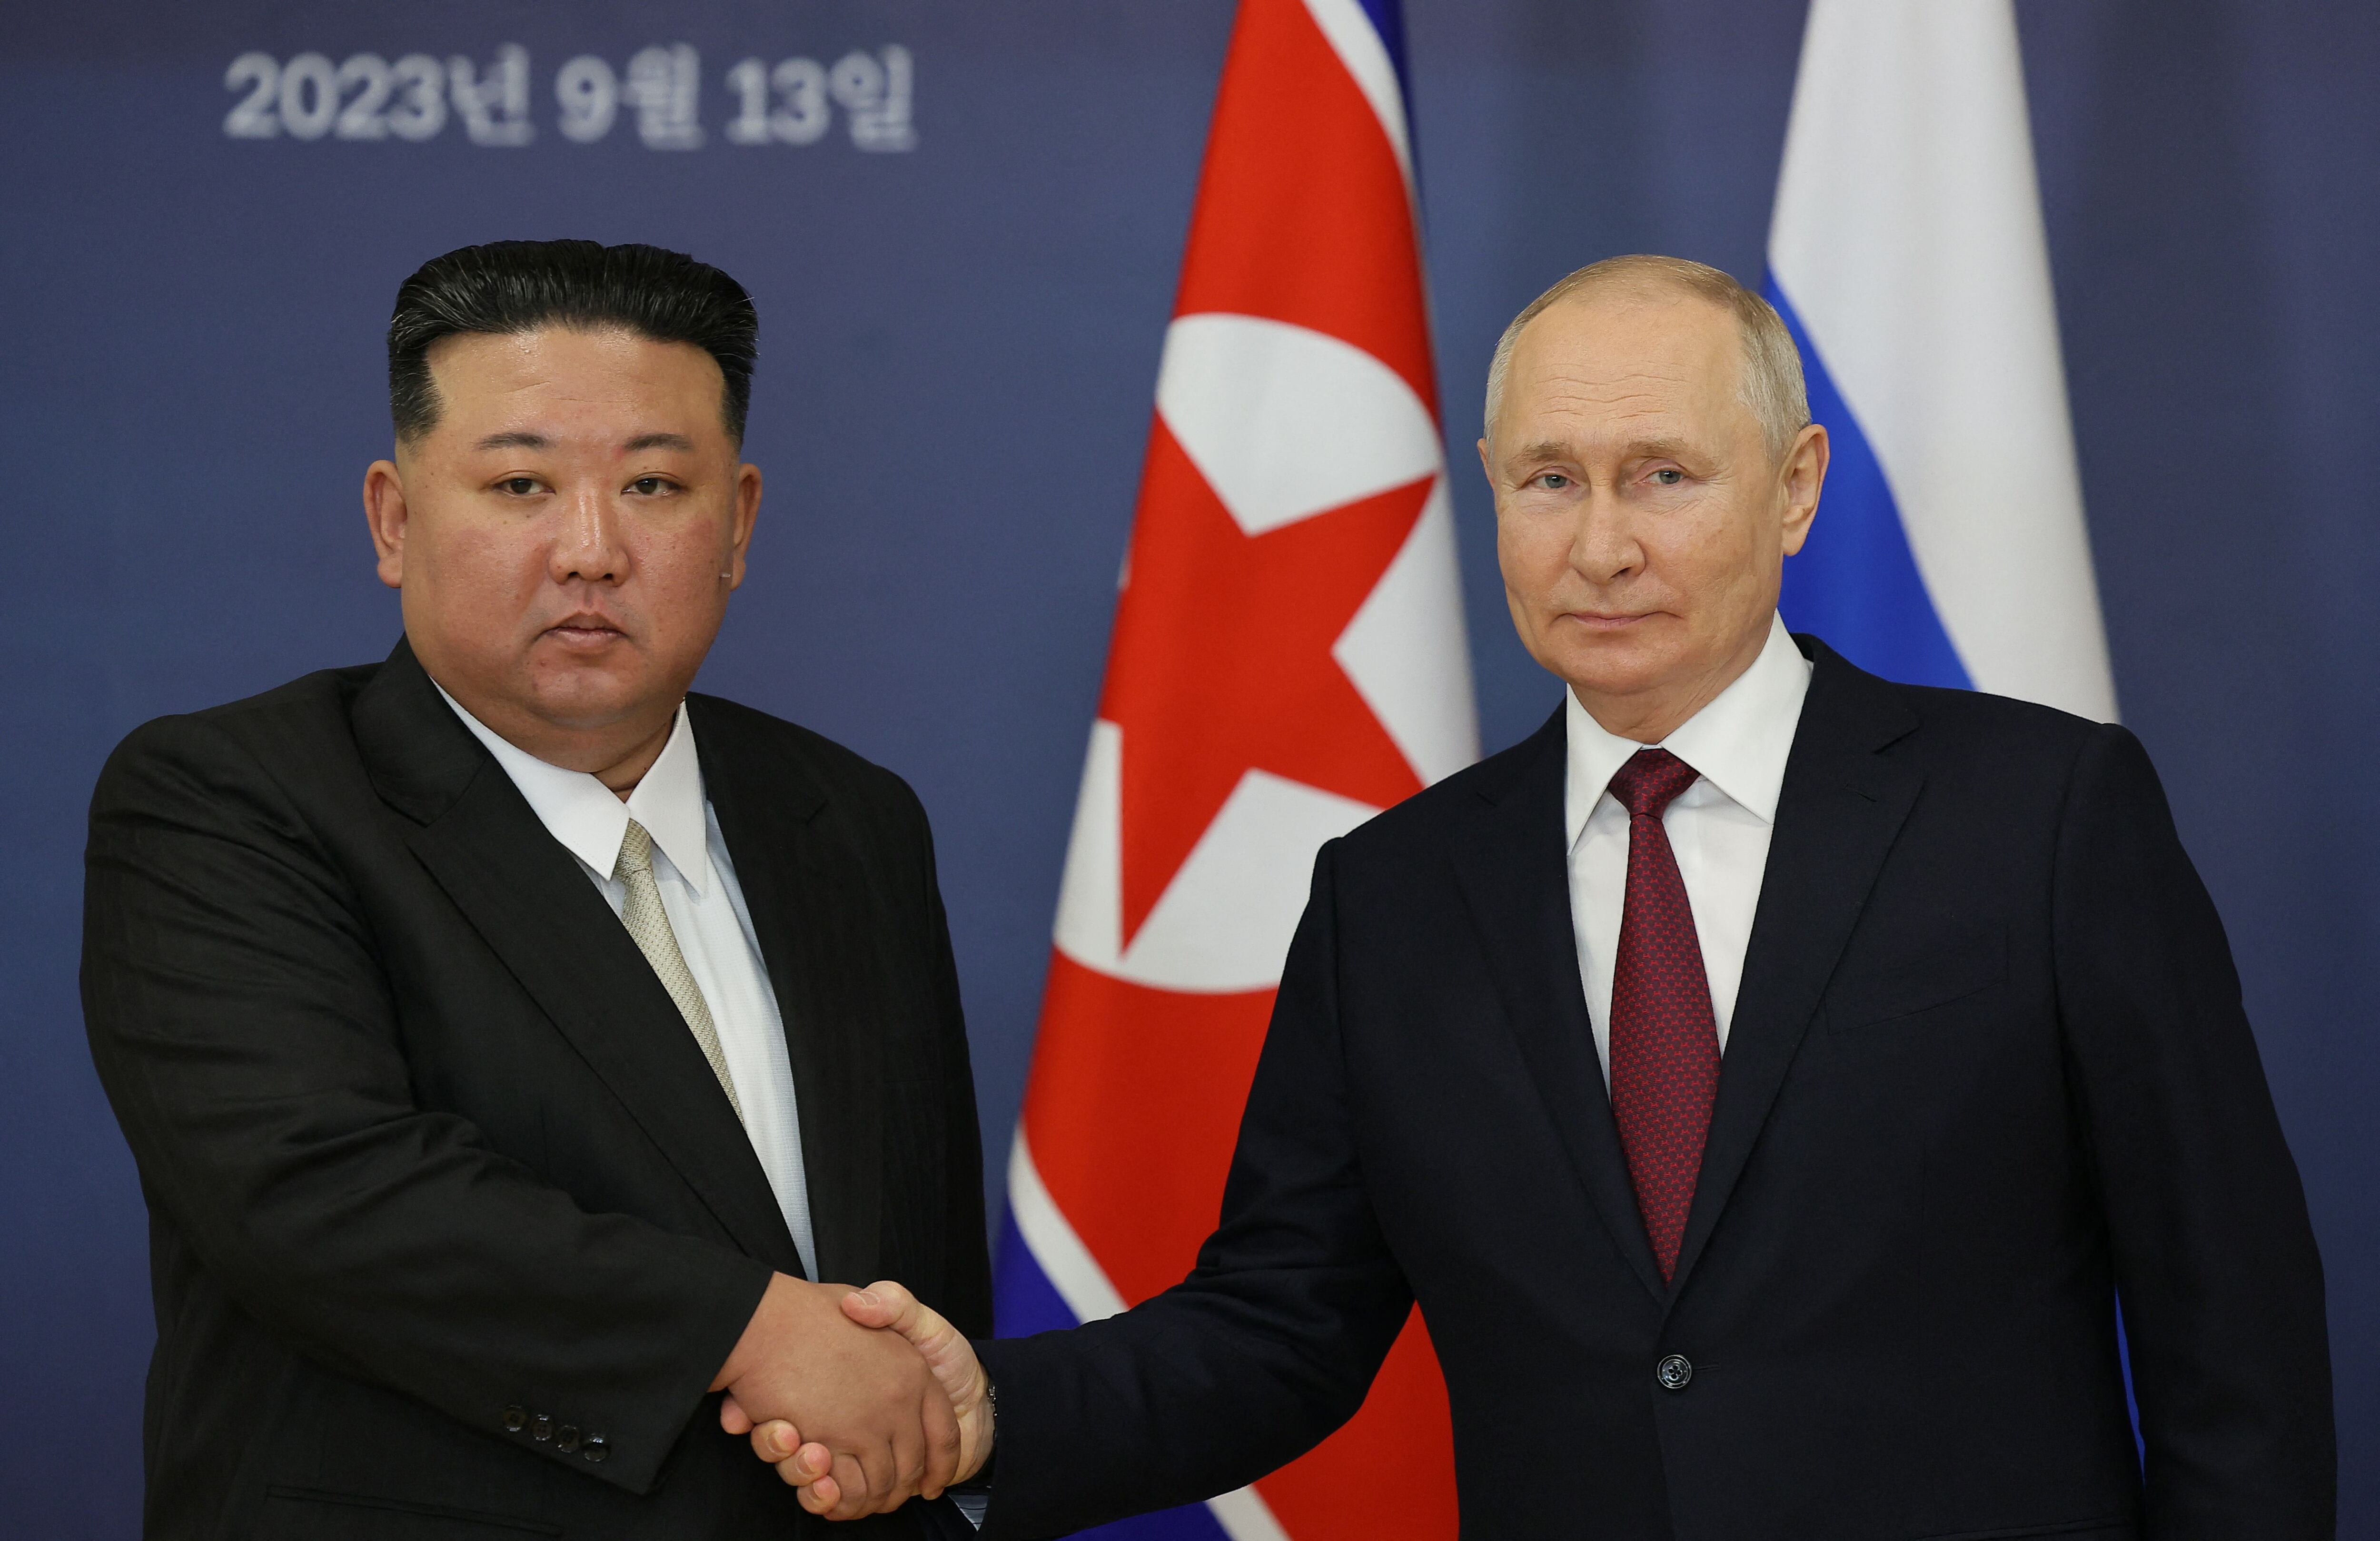 Russian President Vladimir Putin and North Korean leader Kim Jong-un shake hands during a meeting at the Vostochny cosmodrome, in the Amur region, on September 13, 2023. (Photo by Vladimir SMIRNOV / AFP).